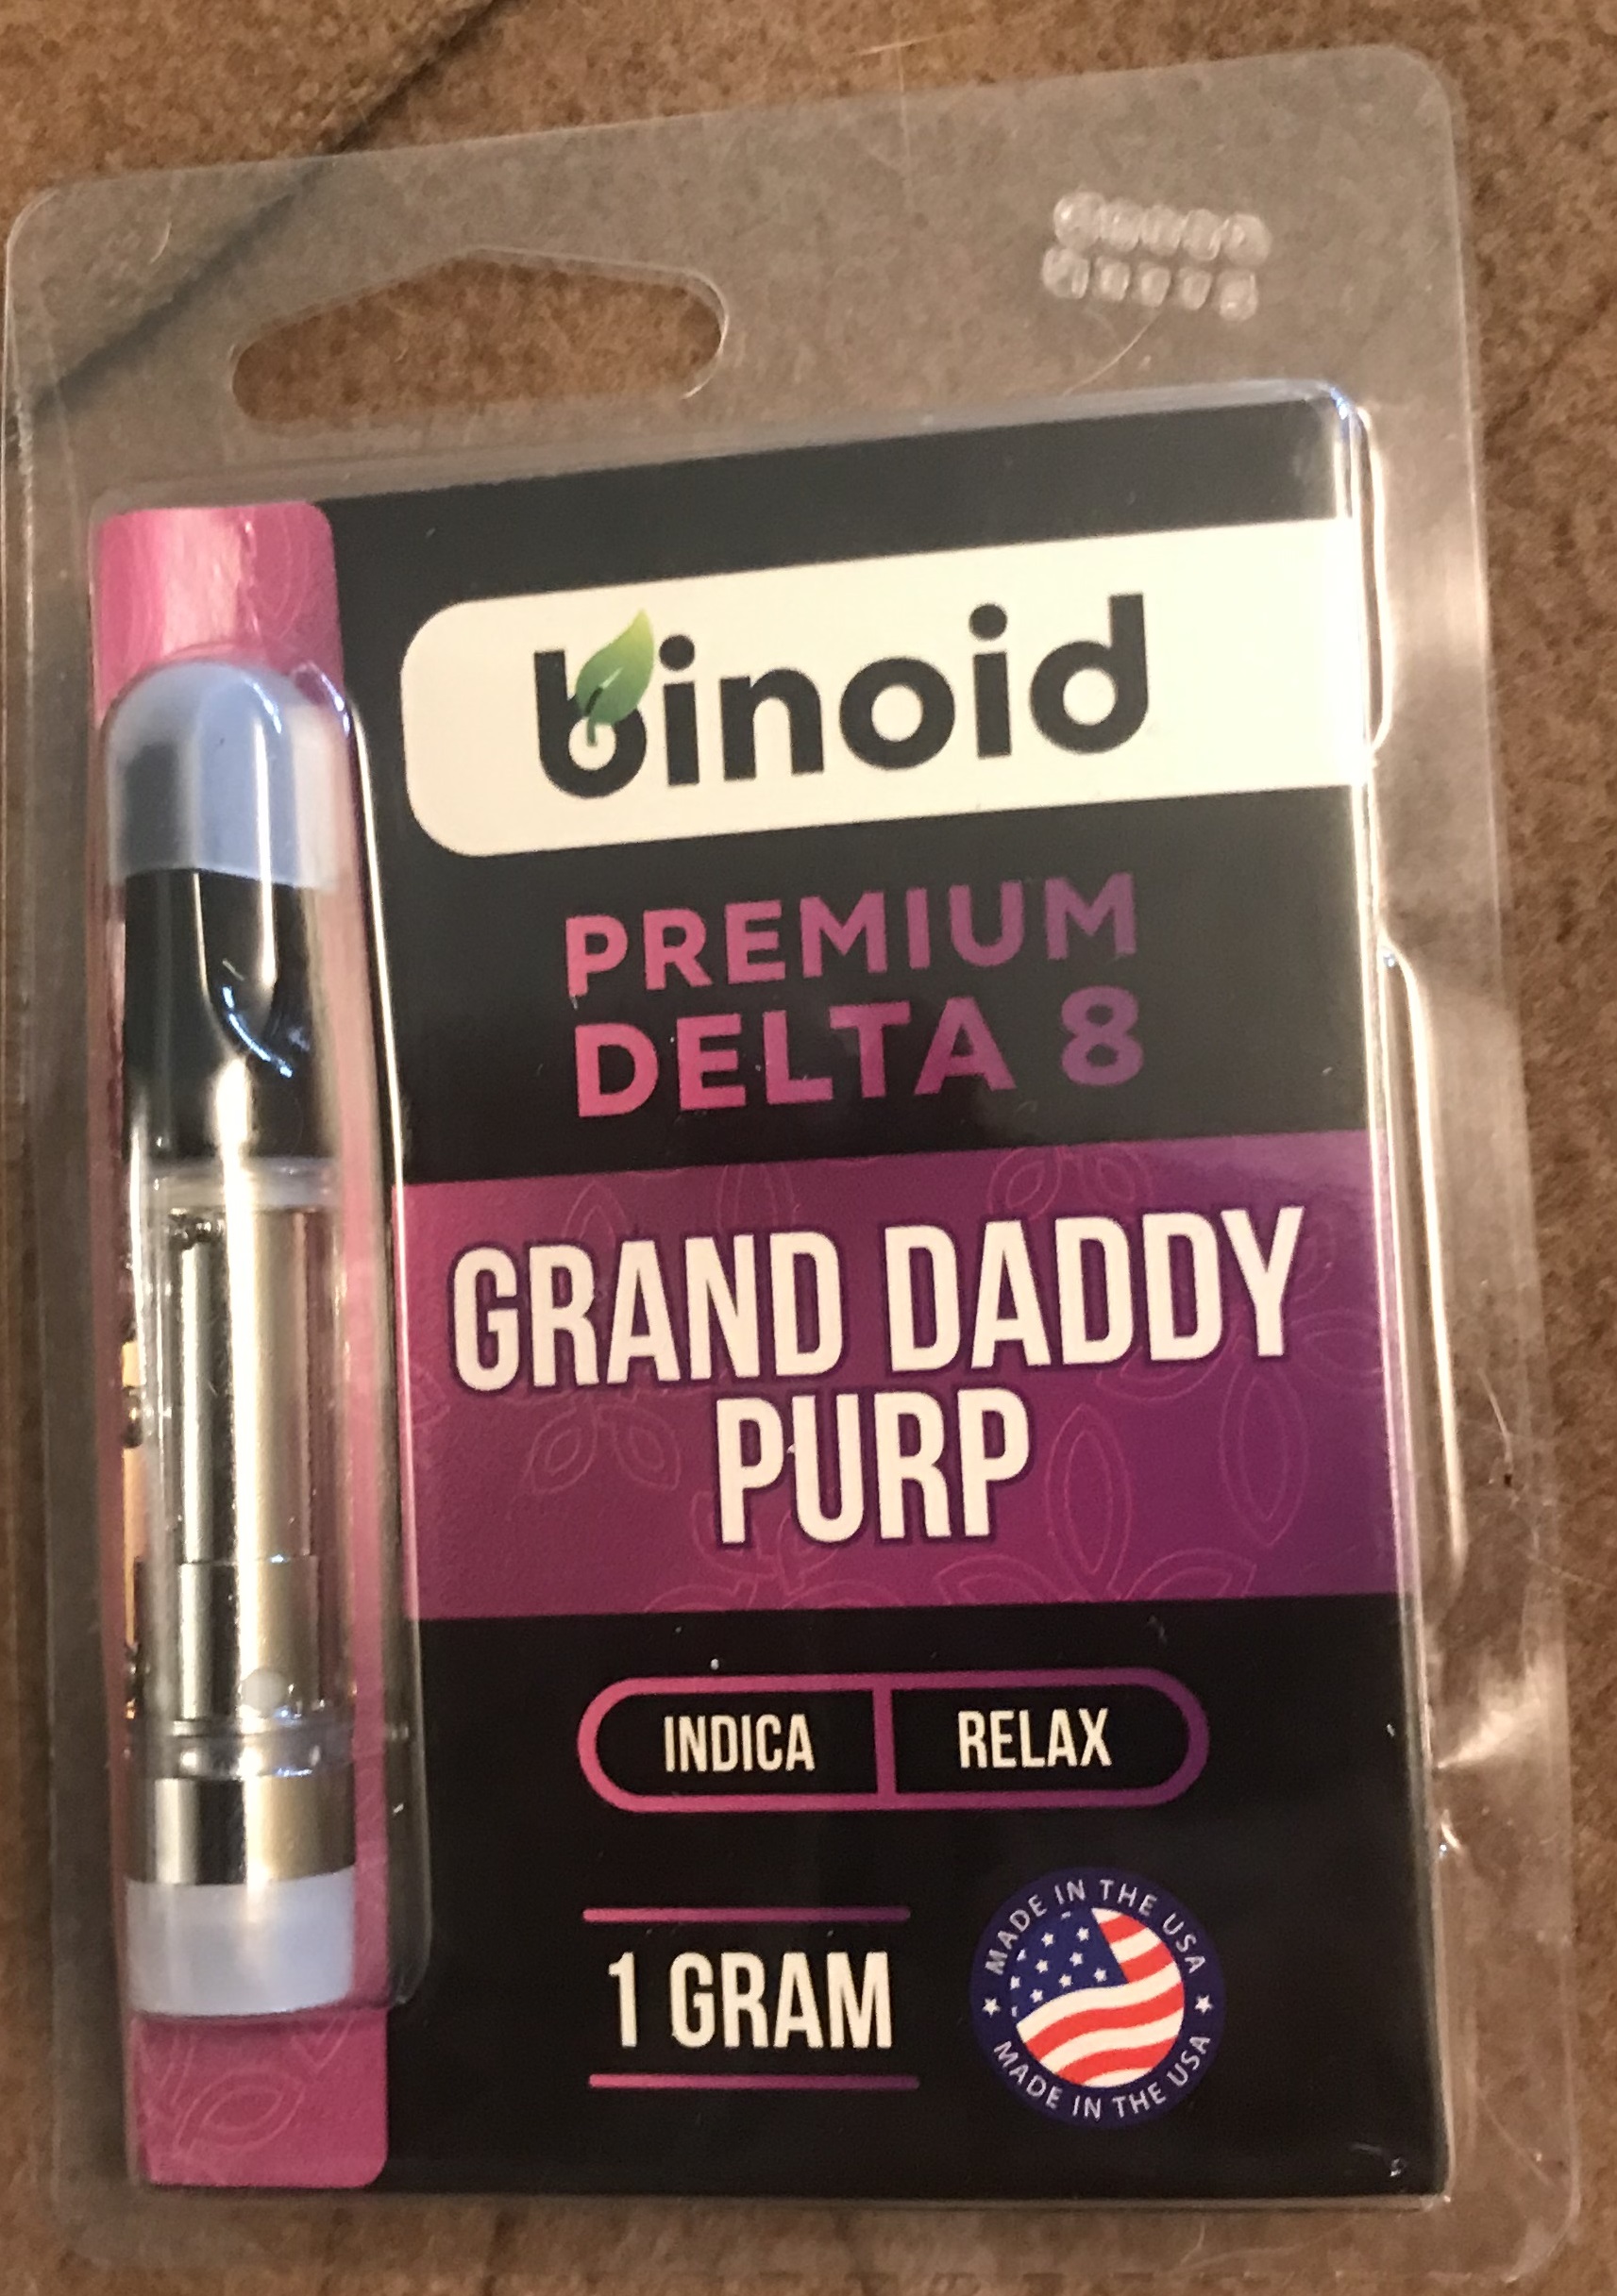 Delta 8 Thc Arkansas - Products|Thc|Hemp|Brand|Gummies|Product|Delta-8|Cbd|Origin|Cannabis|Delta|Users|Effects|Cartridges|Brands|Range|List|Research|Usasource|Options|Benefits|Plant|Companies|Vape|Source|Results|Gummy|People|Space|High-Quality|Quality|Place|Overview|Flowers|Lab|Drug|Cannabinoids|Tinctures|Overviewproducts|Cartridge|Delta-8 Thc|Delta-8 Products|Delta-9 Thc|Delta-8 Brands|Usa Source|Delta-8 Thc Products|Cannabis Plant|Federal Level|United States|Delta-8 Gummies|Delta-8 Space|Health Canada|Delta Products|Delta-8 Thc Gummies|Delta-8 Companies|Vape Cartridges|Similar Benefits|Hemp Doctor|Brand Overviewproducts|Drug Test|High-Quality Products|Organic Hemp|San Jose|Editorial Team|Farm Bill|Overview Products|Wide Range|Psychoactive Properties|Reliable Provider|Boston Hempire